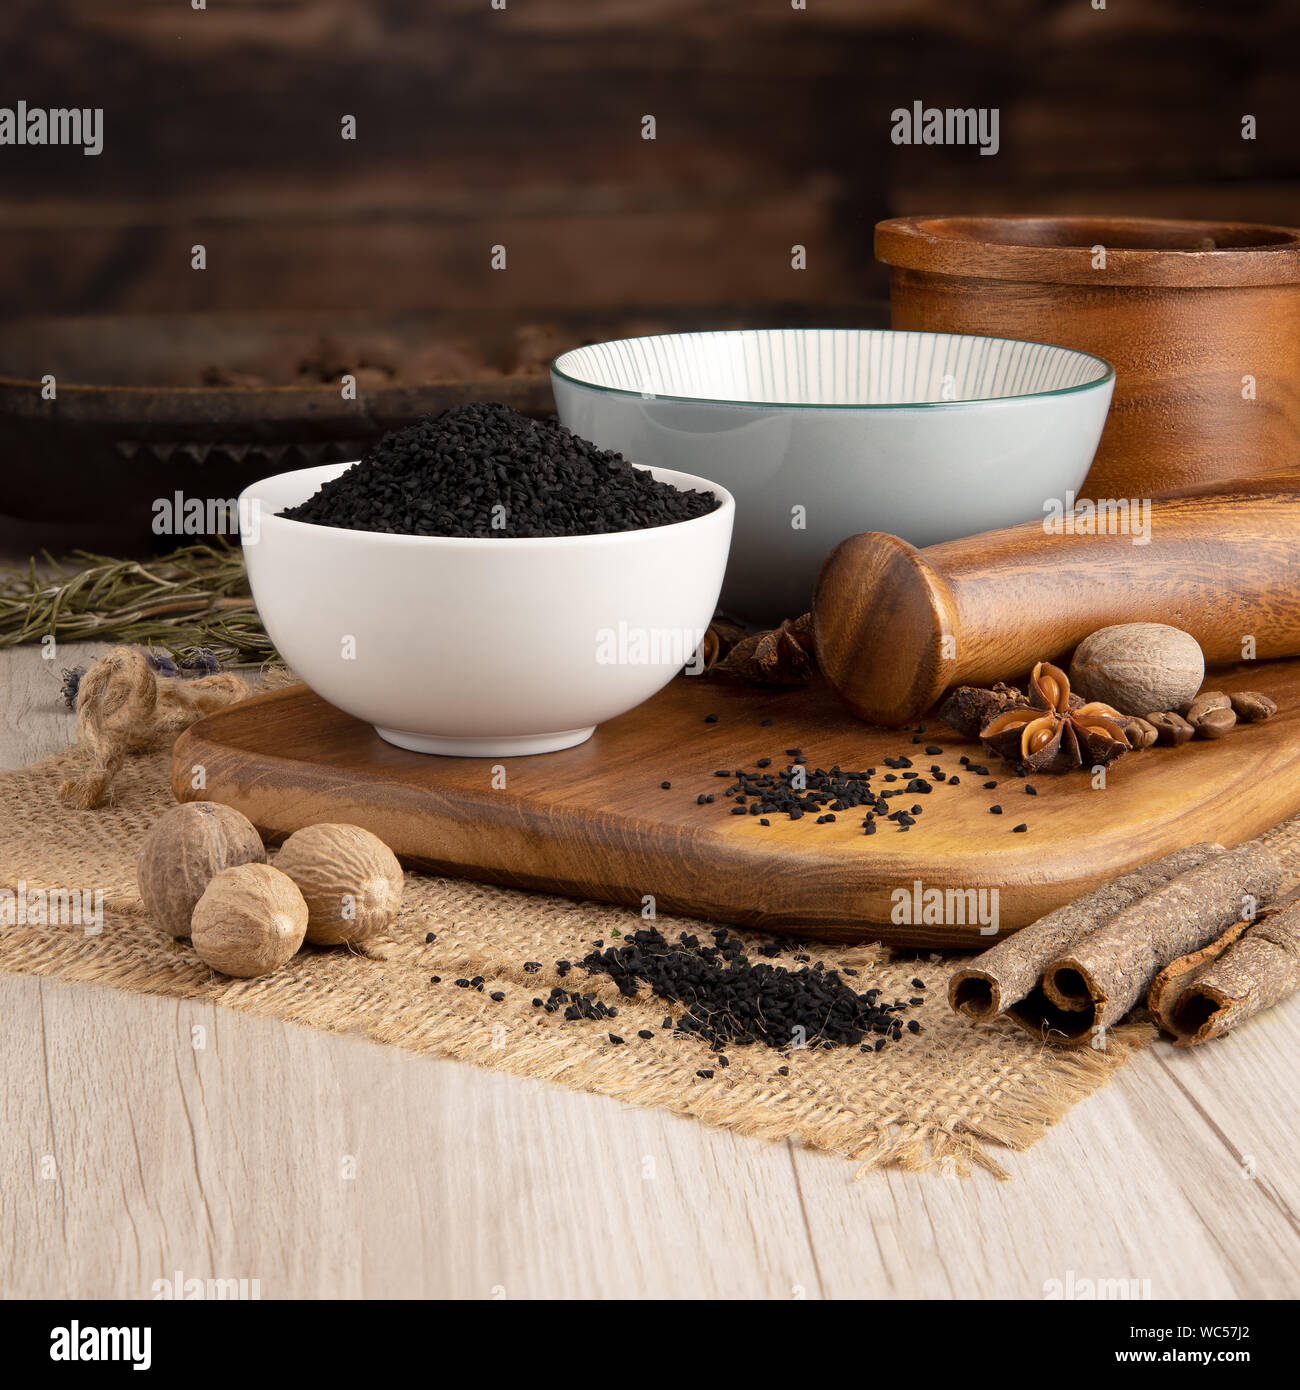 Nigella Seeds in a bowl and food preparation and kitchen setting Stock Photo